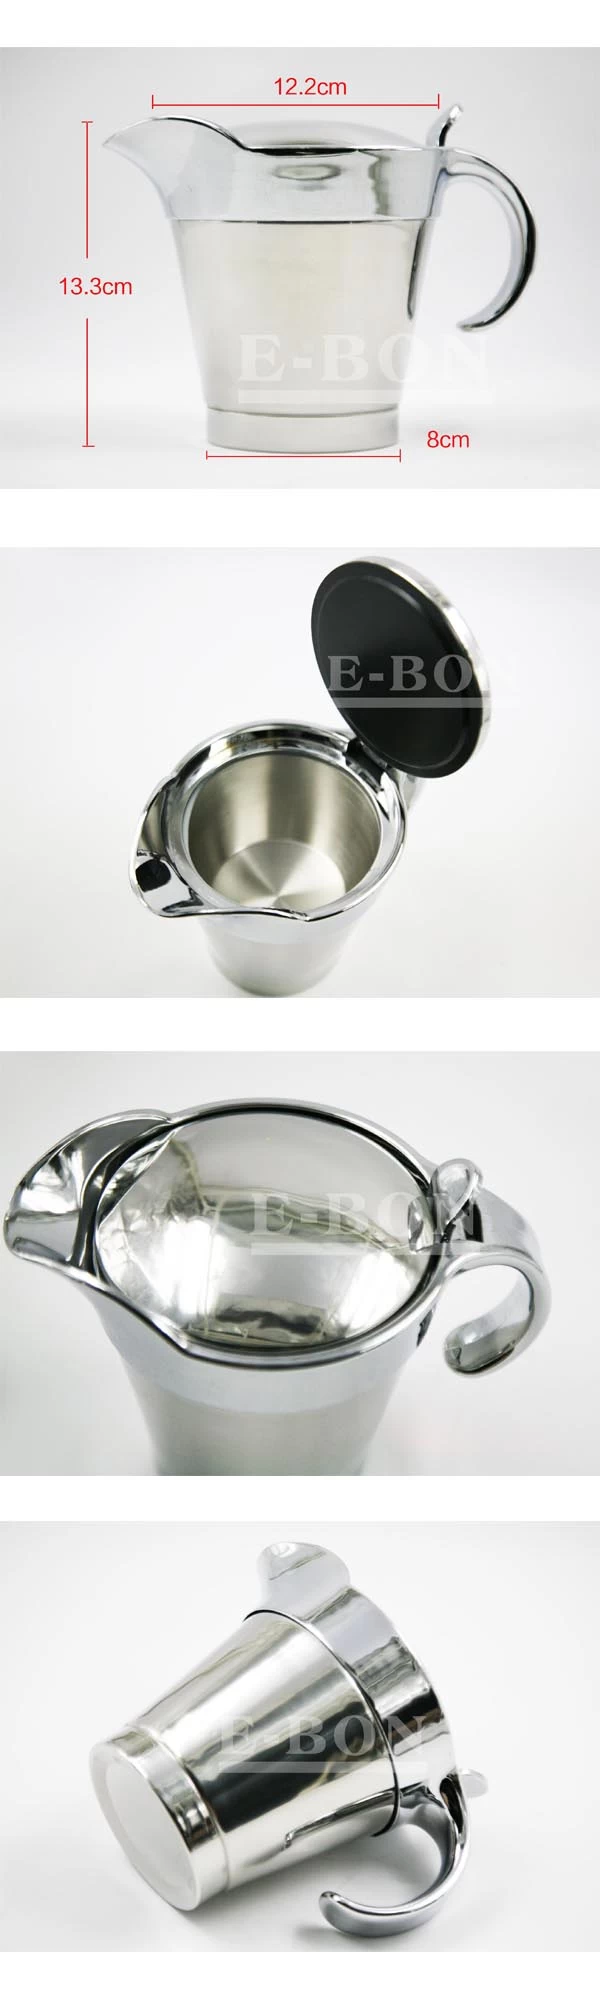 Stainless steel Sauce Boat